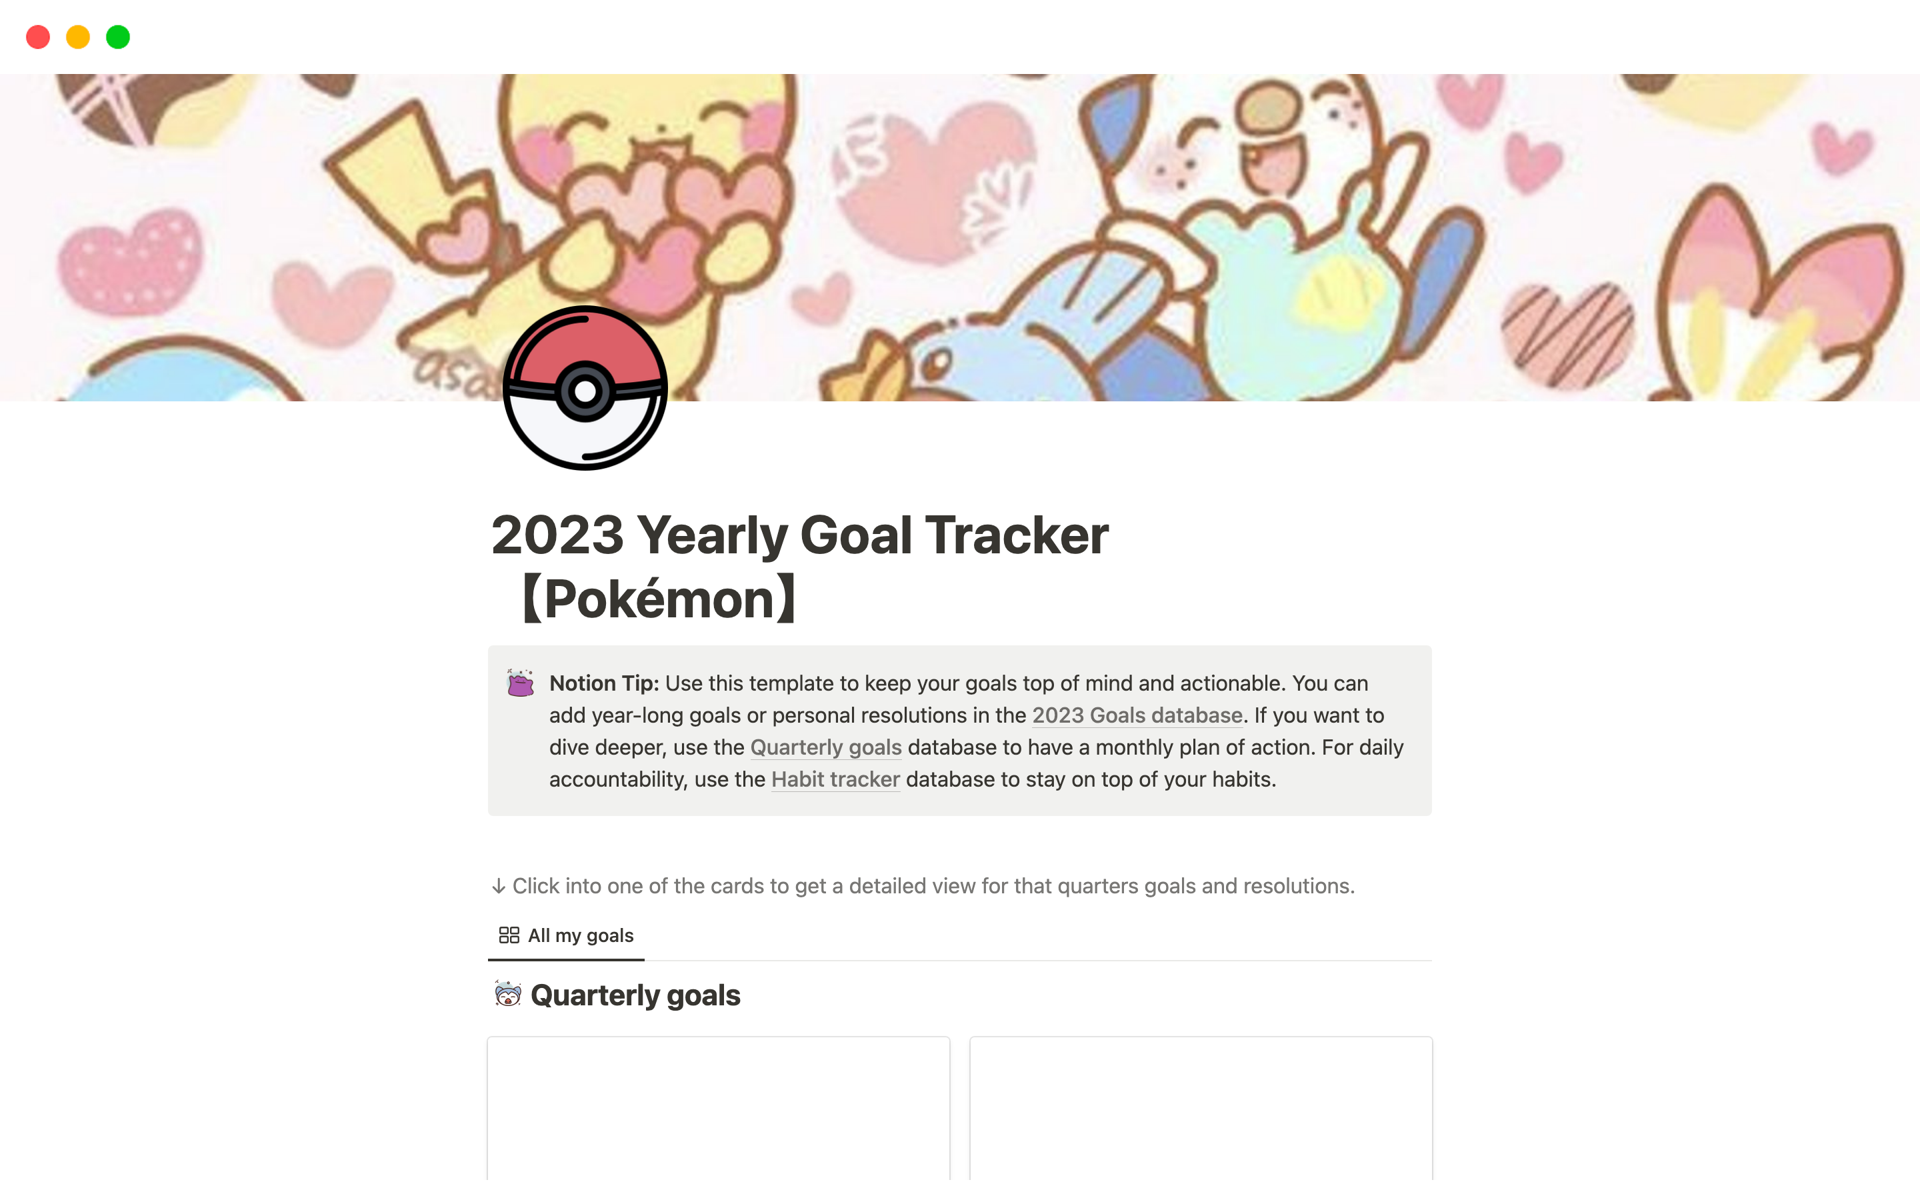 2023 Yearly Goal Tracker [Pokemon] is a delightful way to keep track of your goals for the year. 